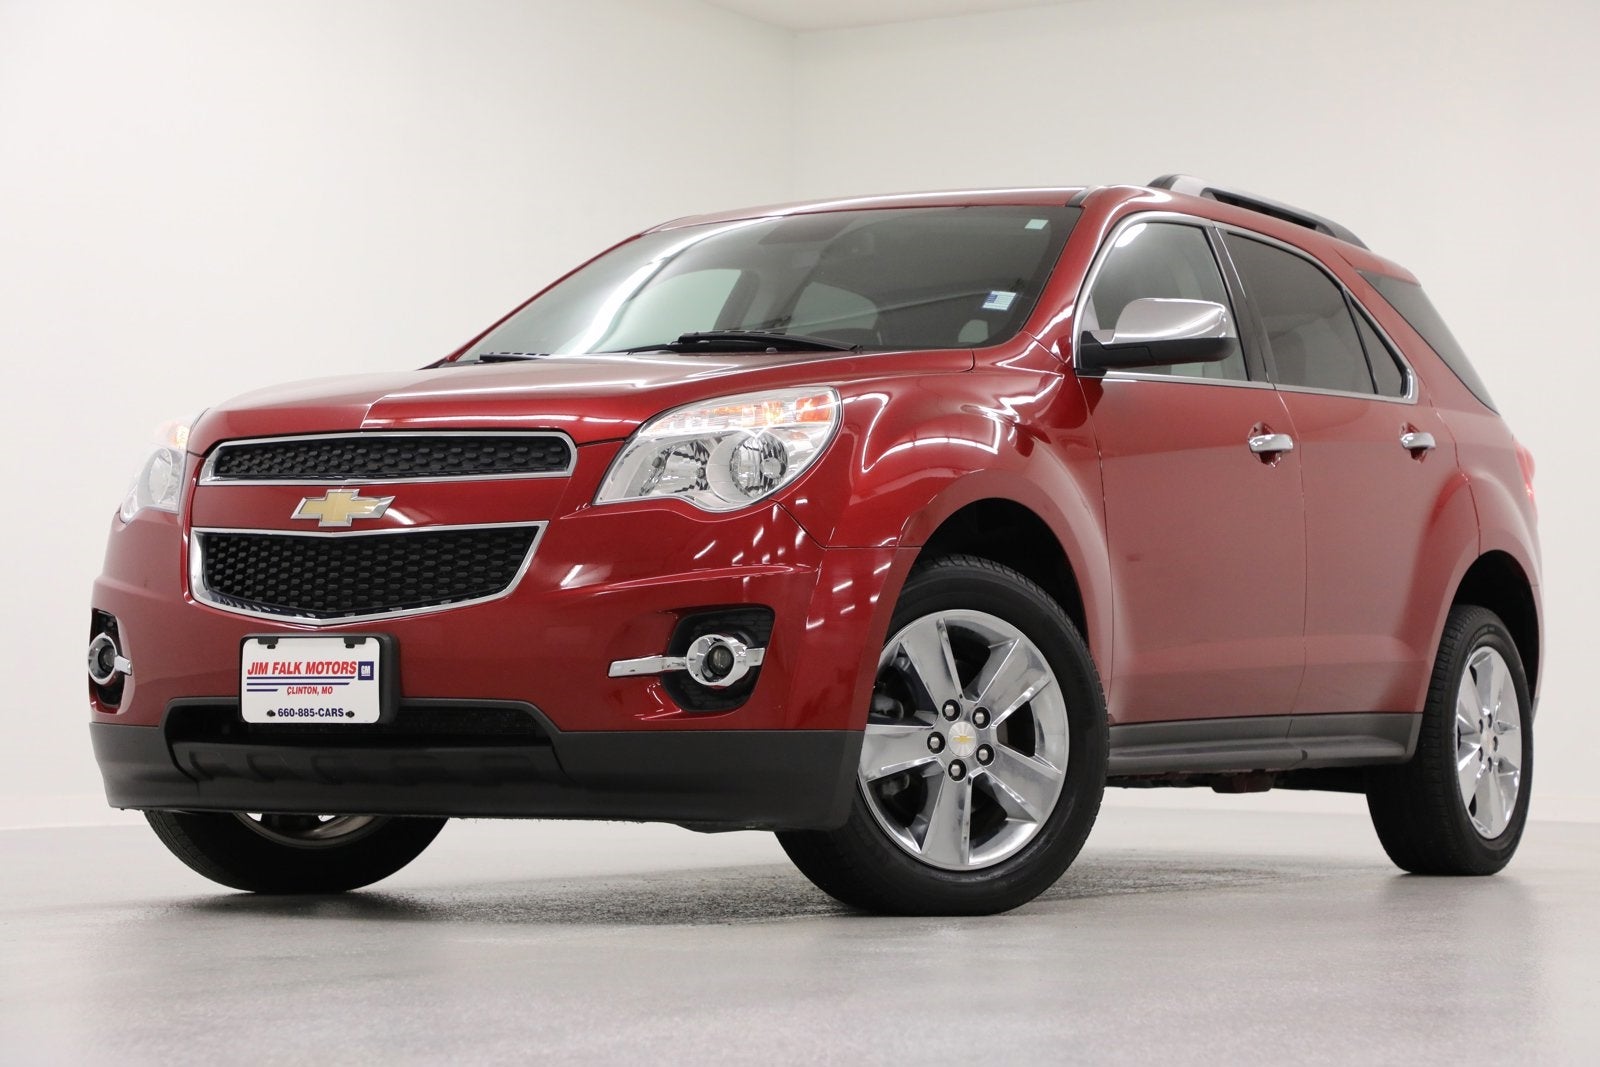 2015 Chevrolet Equinox LT AWD Heated Black Leather Seats Power Liftgate HD Backup Camera Remote Start Bluetooth Cruise